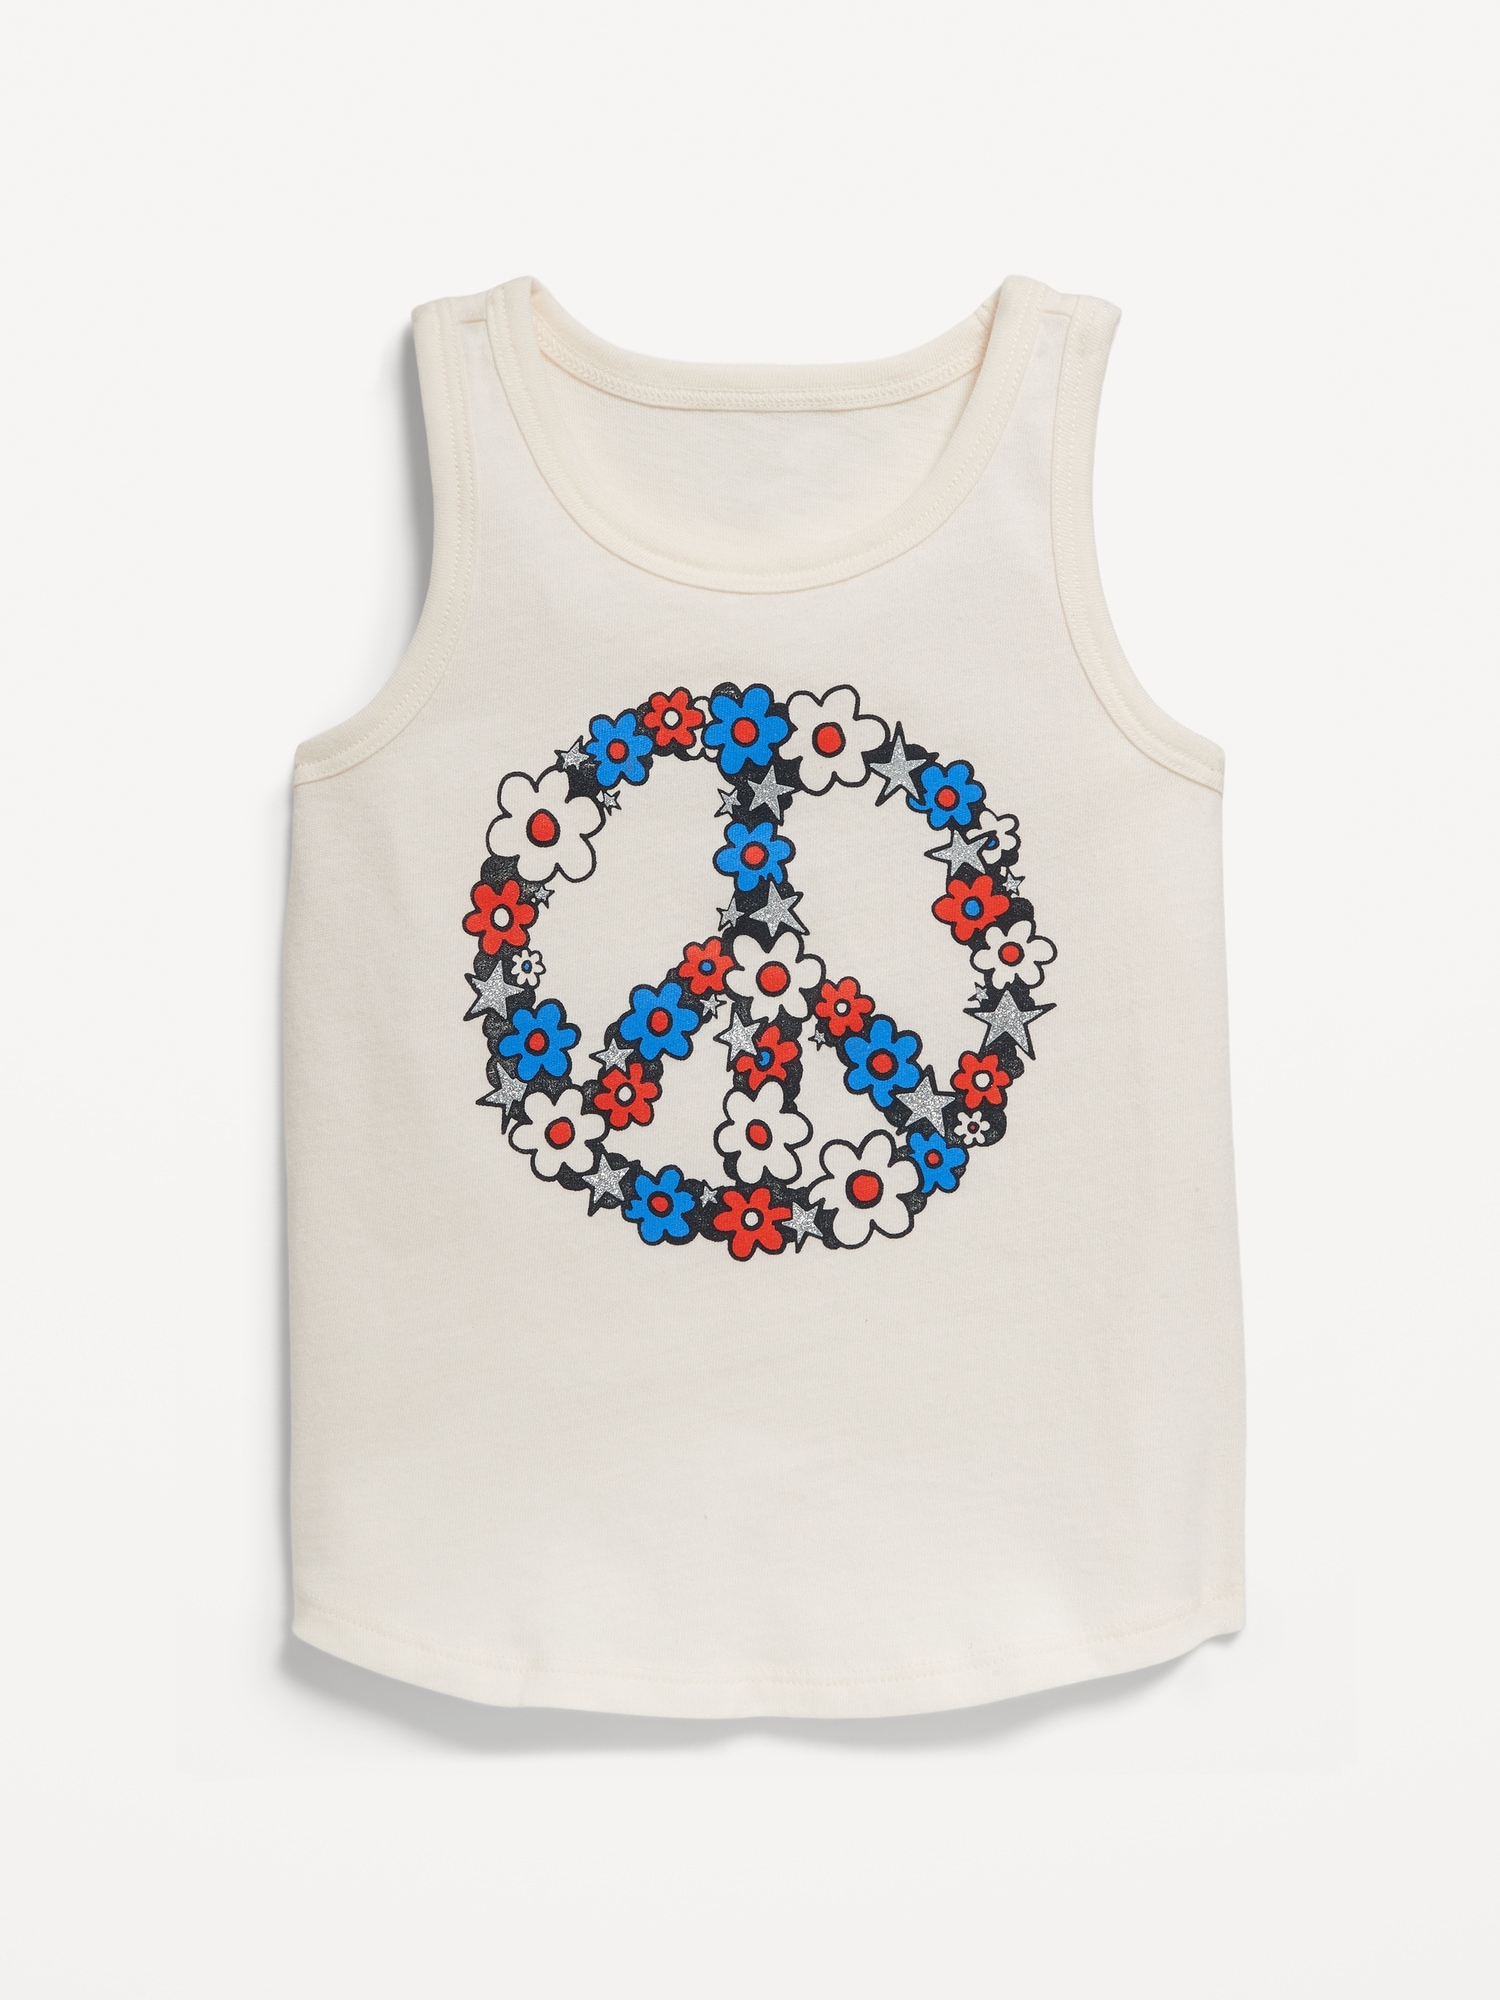 Graphic Tank Top for Toddler Girls